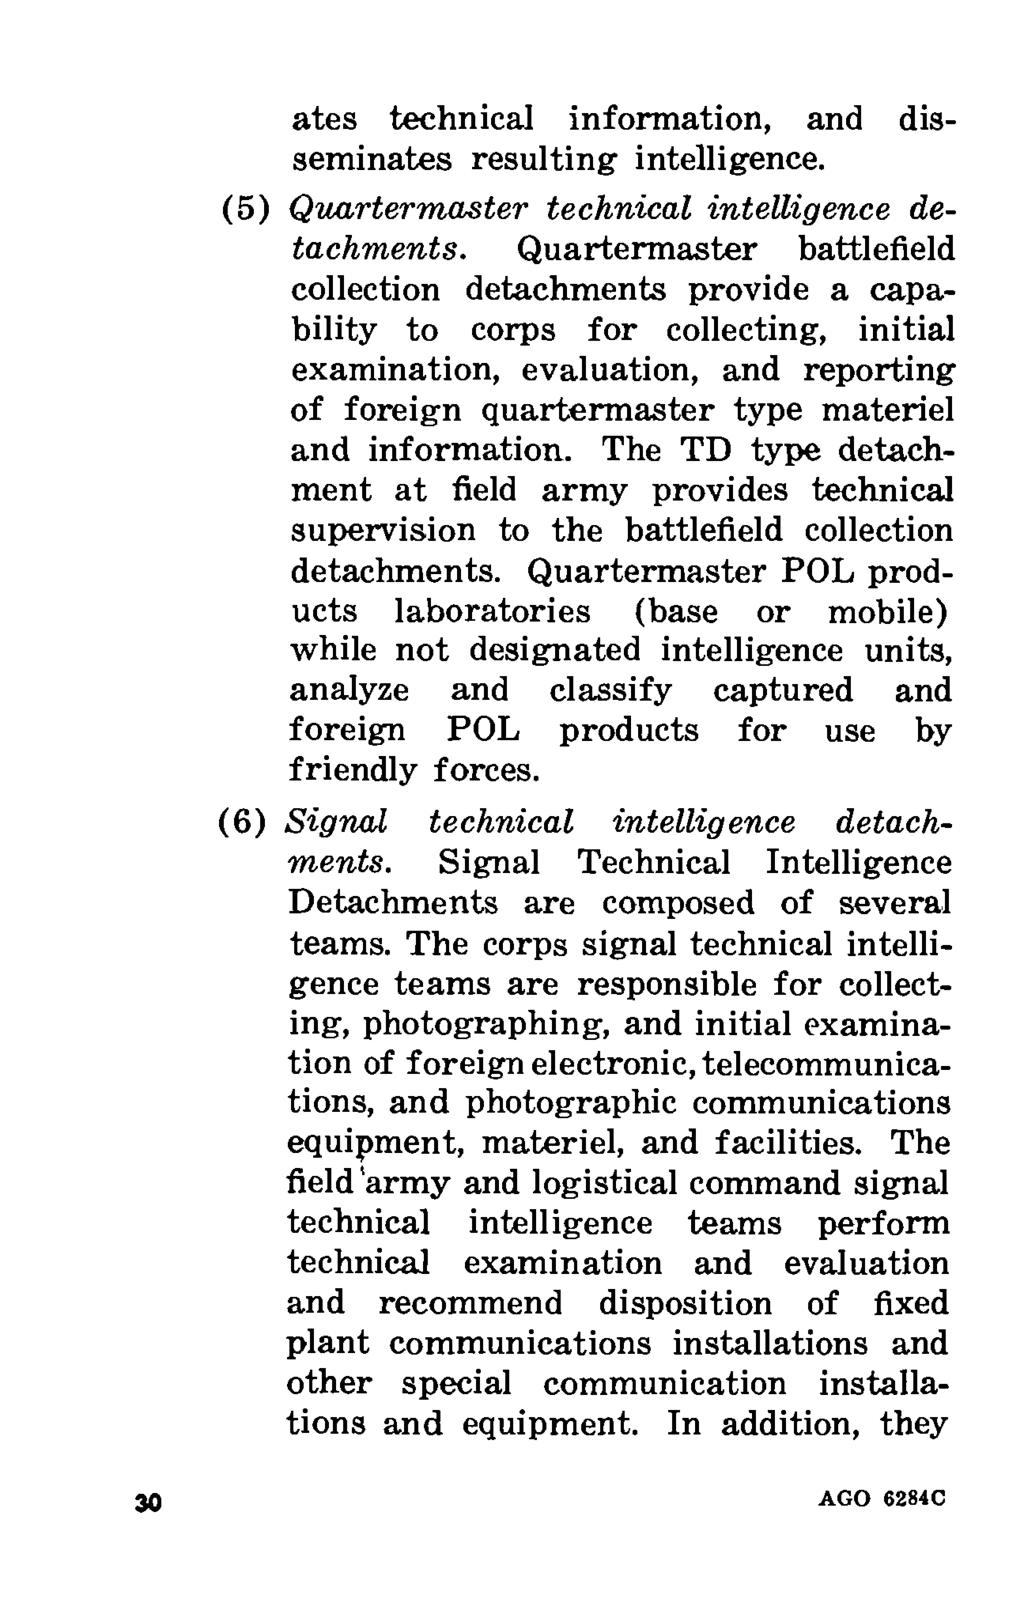 ates technical information, and disseminates resulting intelligence. (5) Quartermaster technical intelligence detachments.